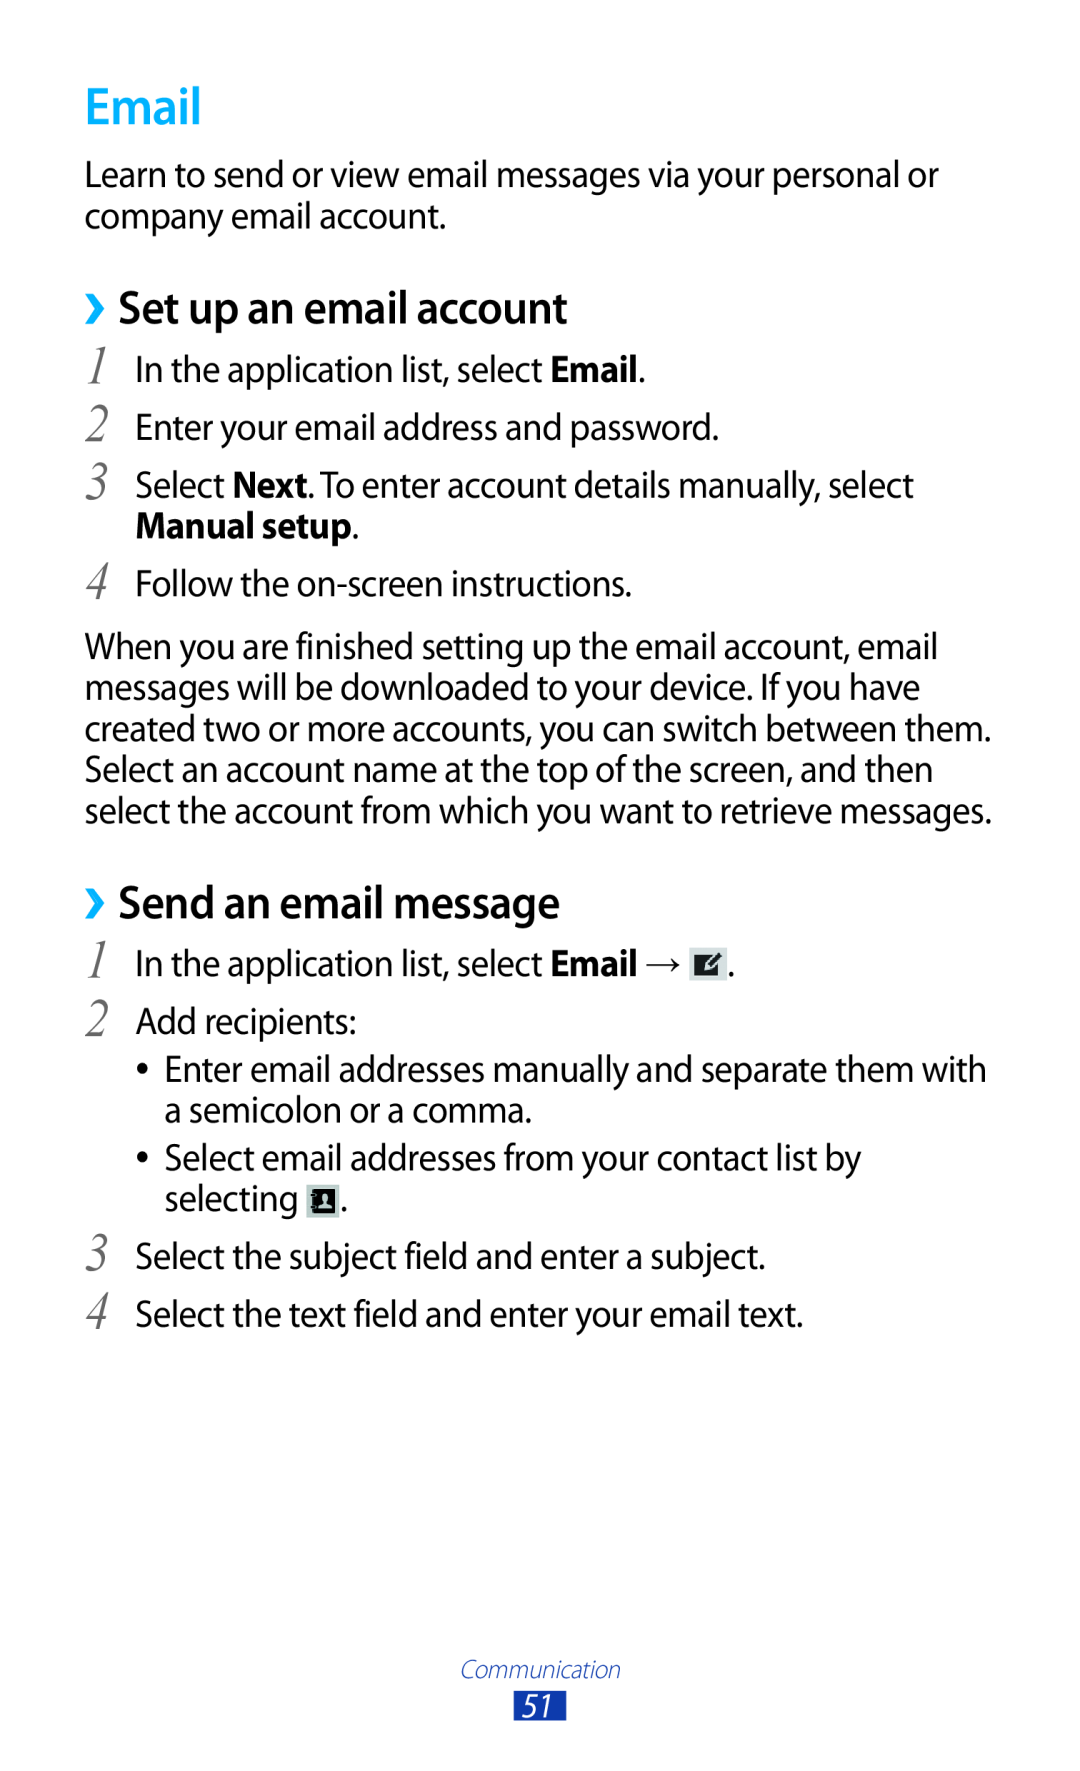 Samsung GTP5110ZWMTTT manual Email, ››Set up an email account, ››Send an email message 